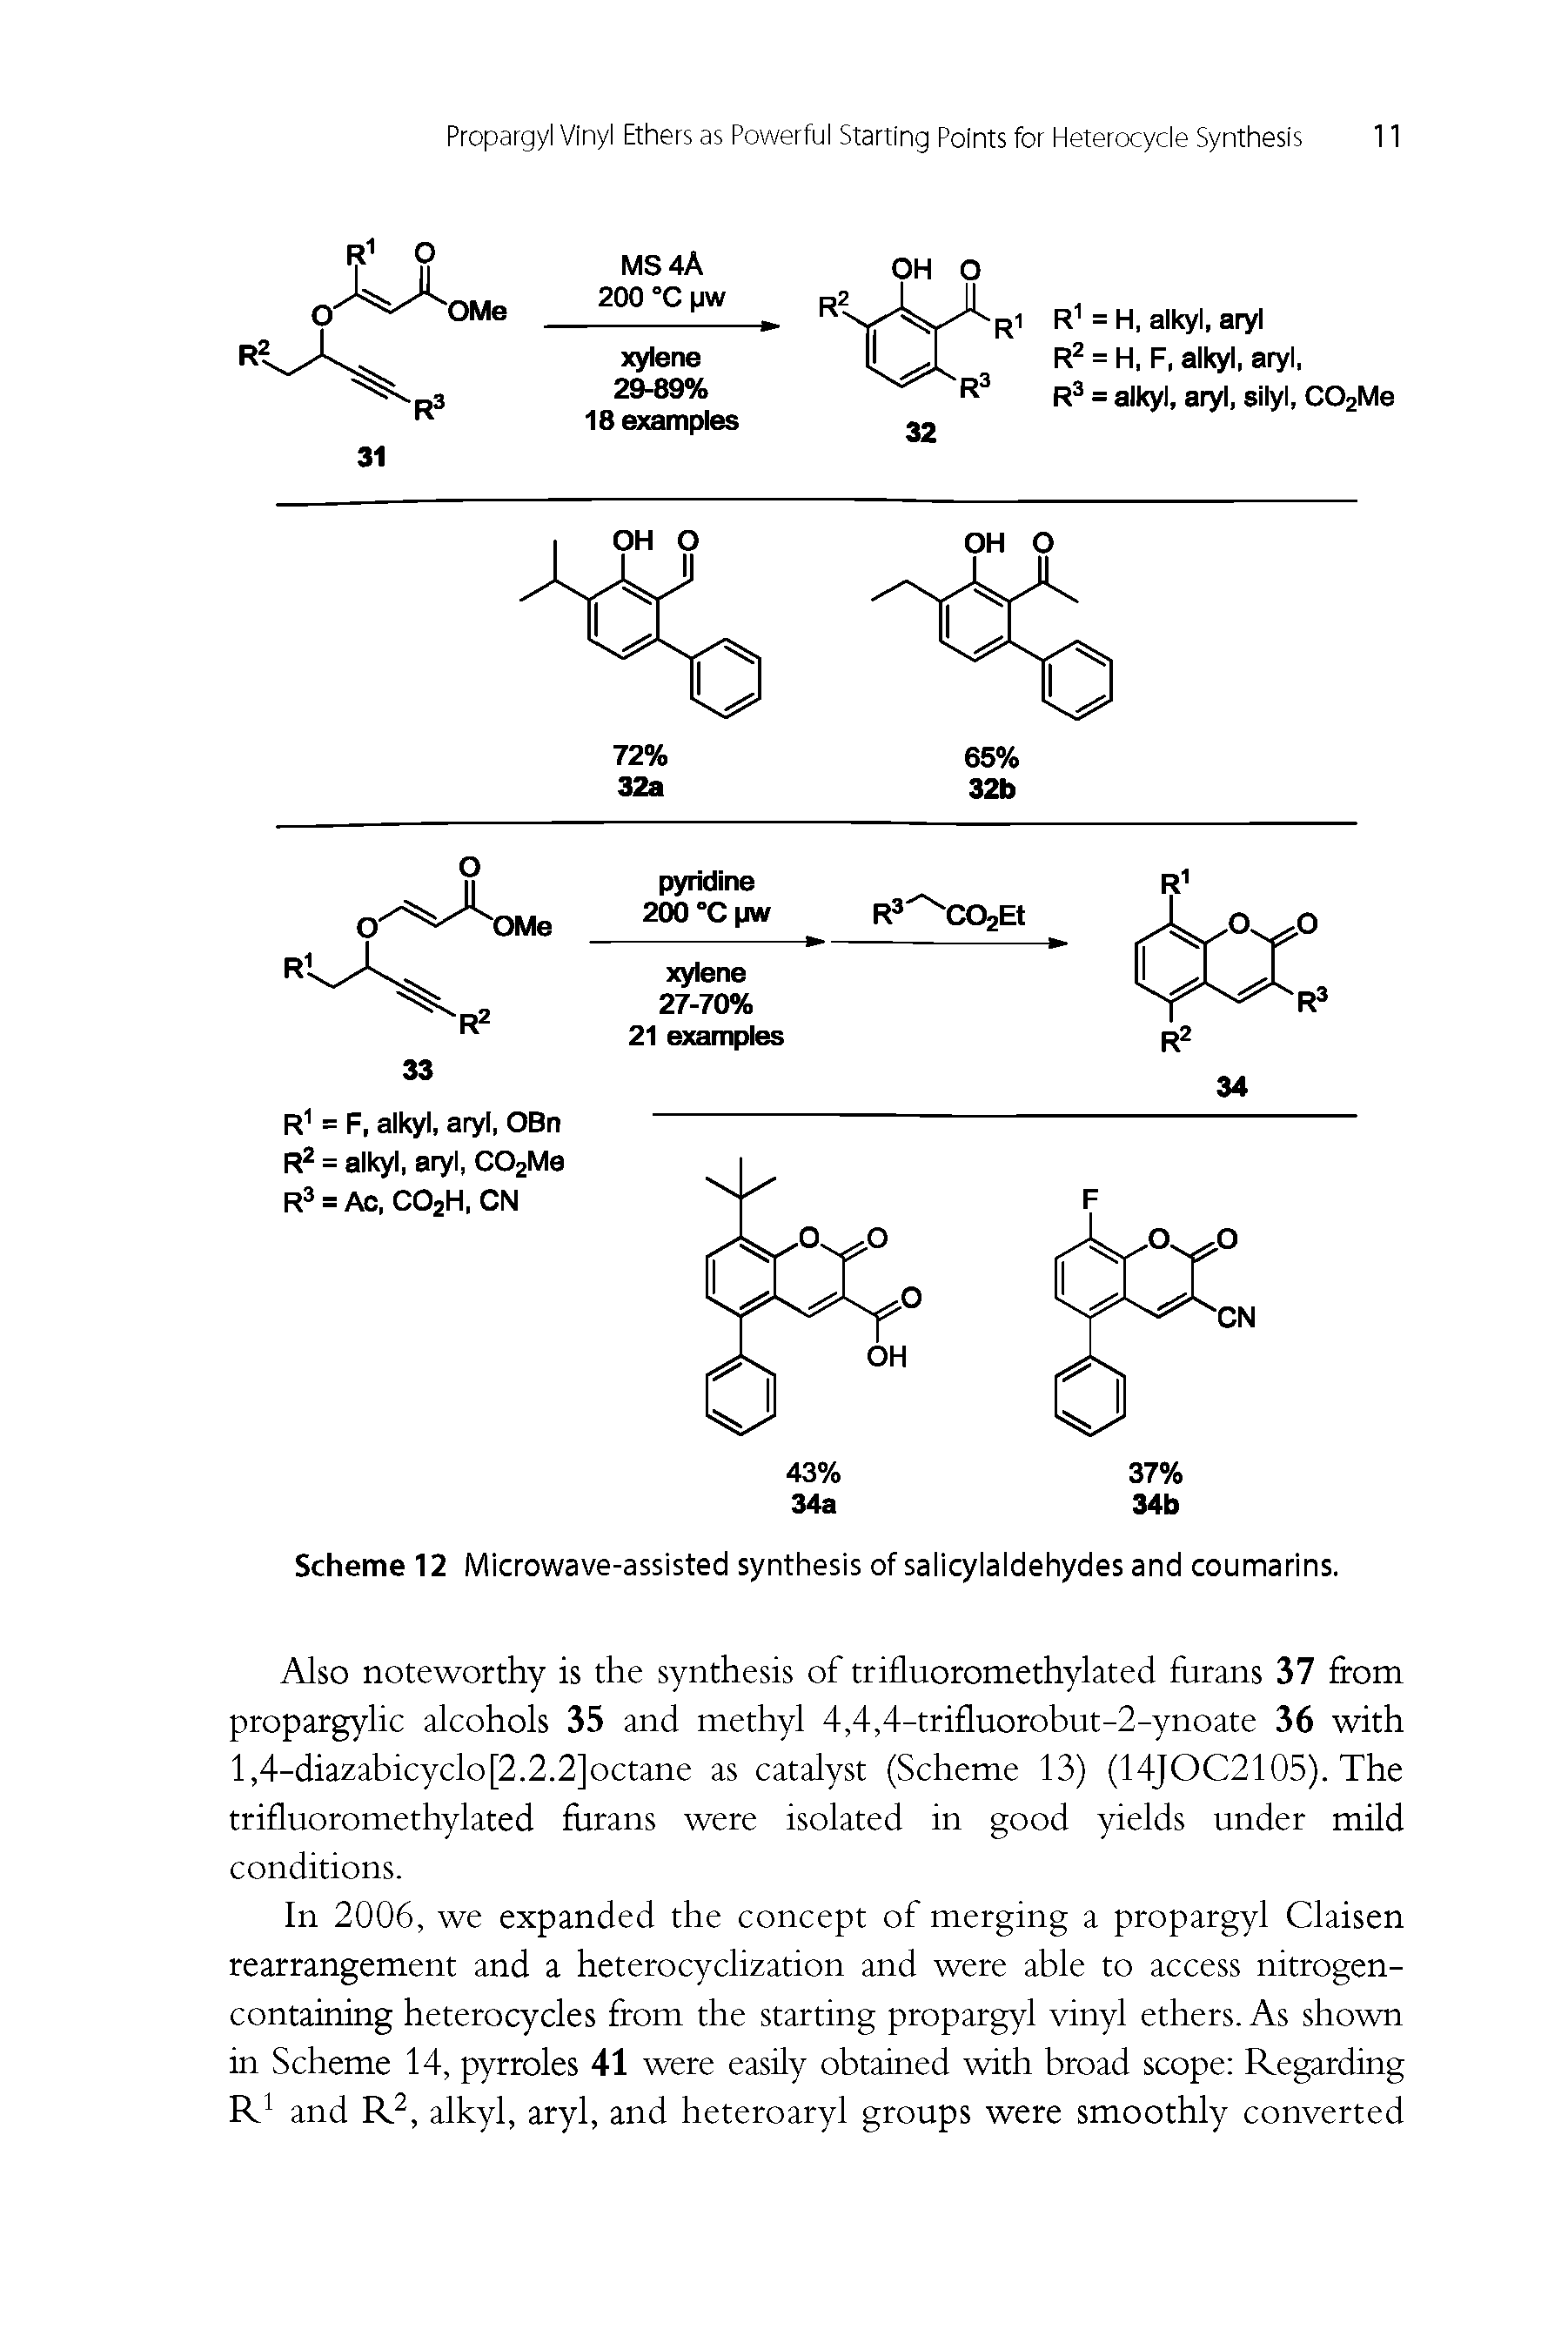 Scheme 12 Microwave-assisted synthesis of saiicyiaidehydes and coumarins.